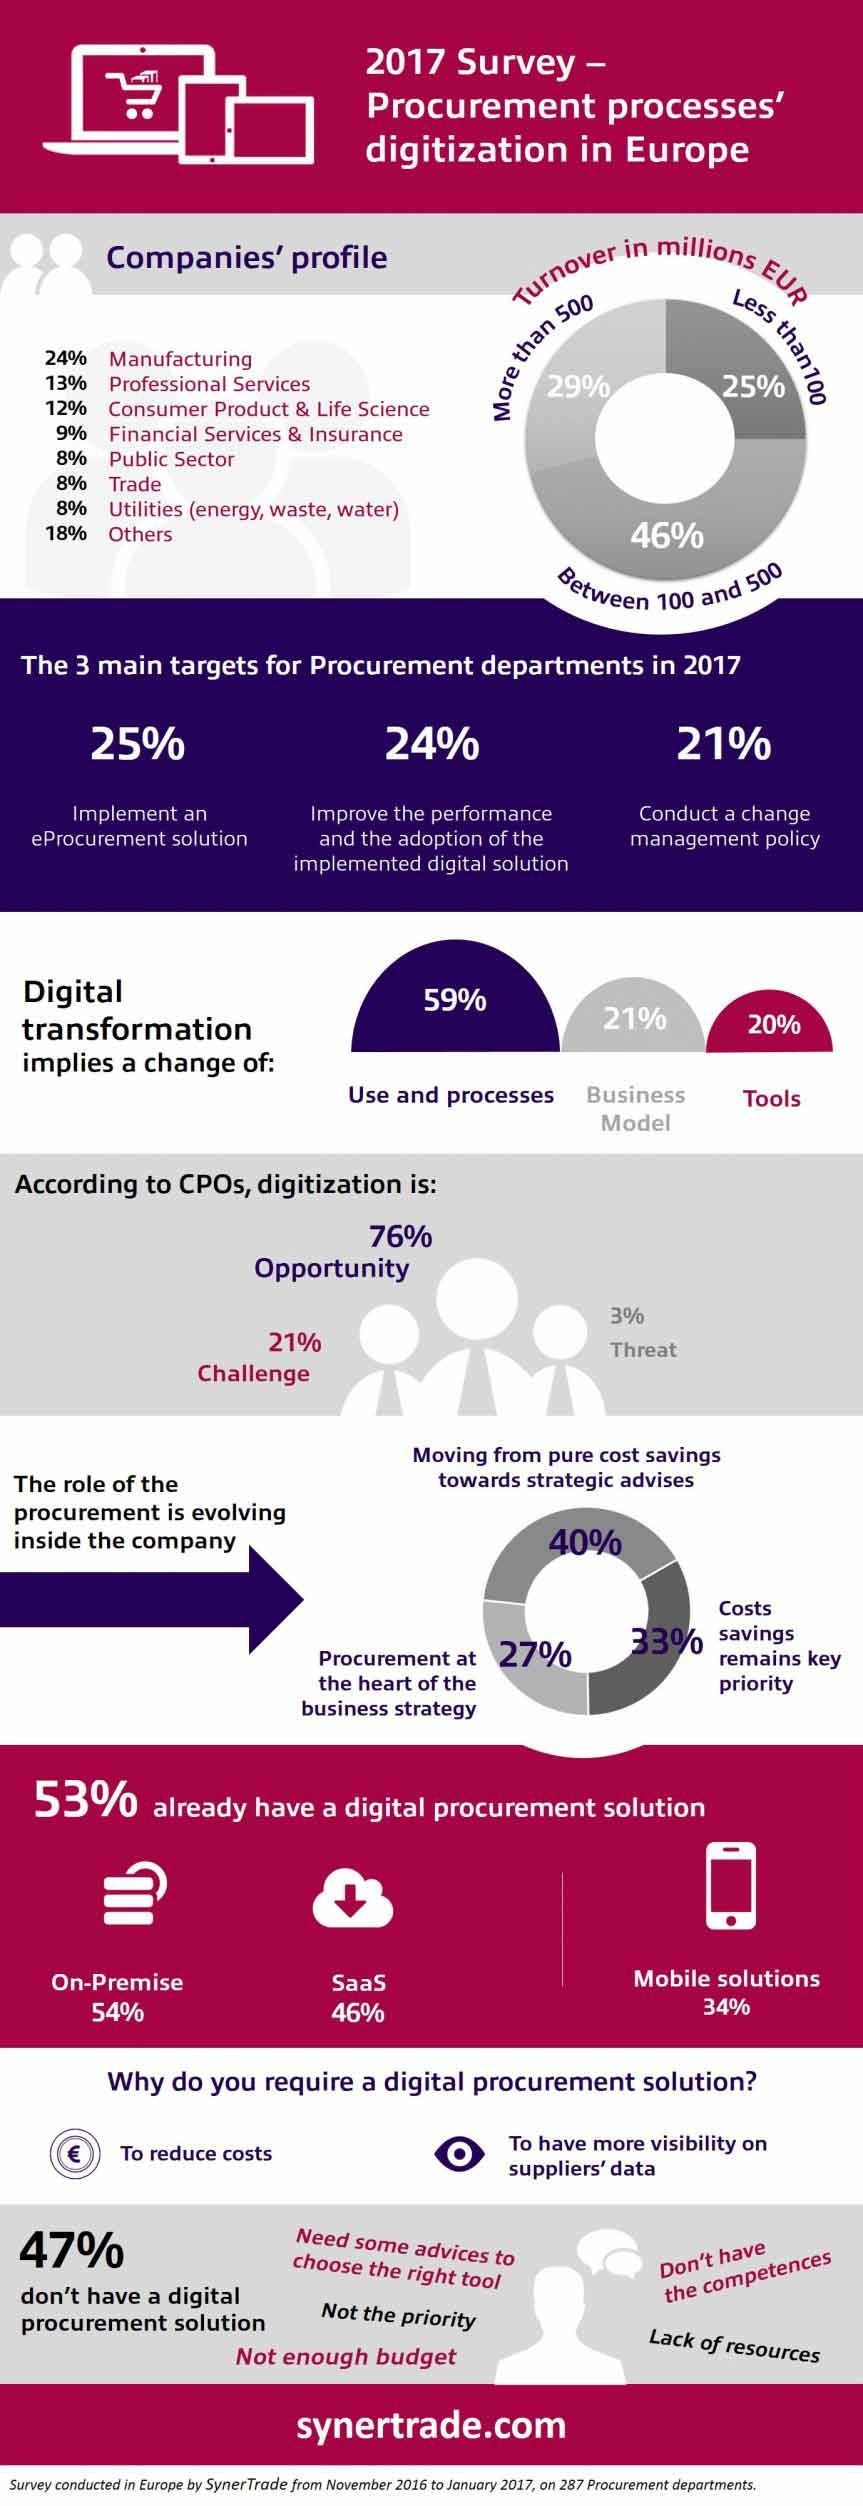 Infographic on the digitisation of procurement processes in Europe